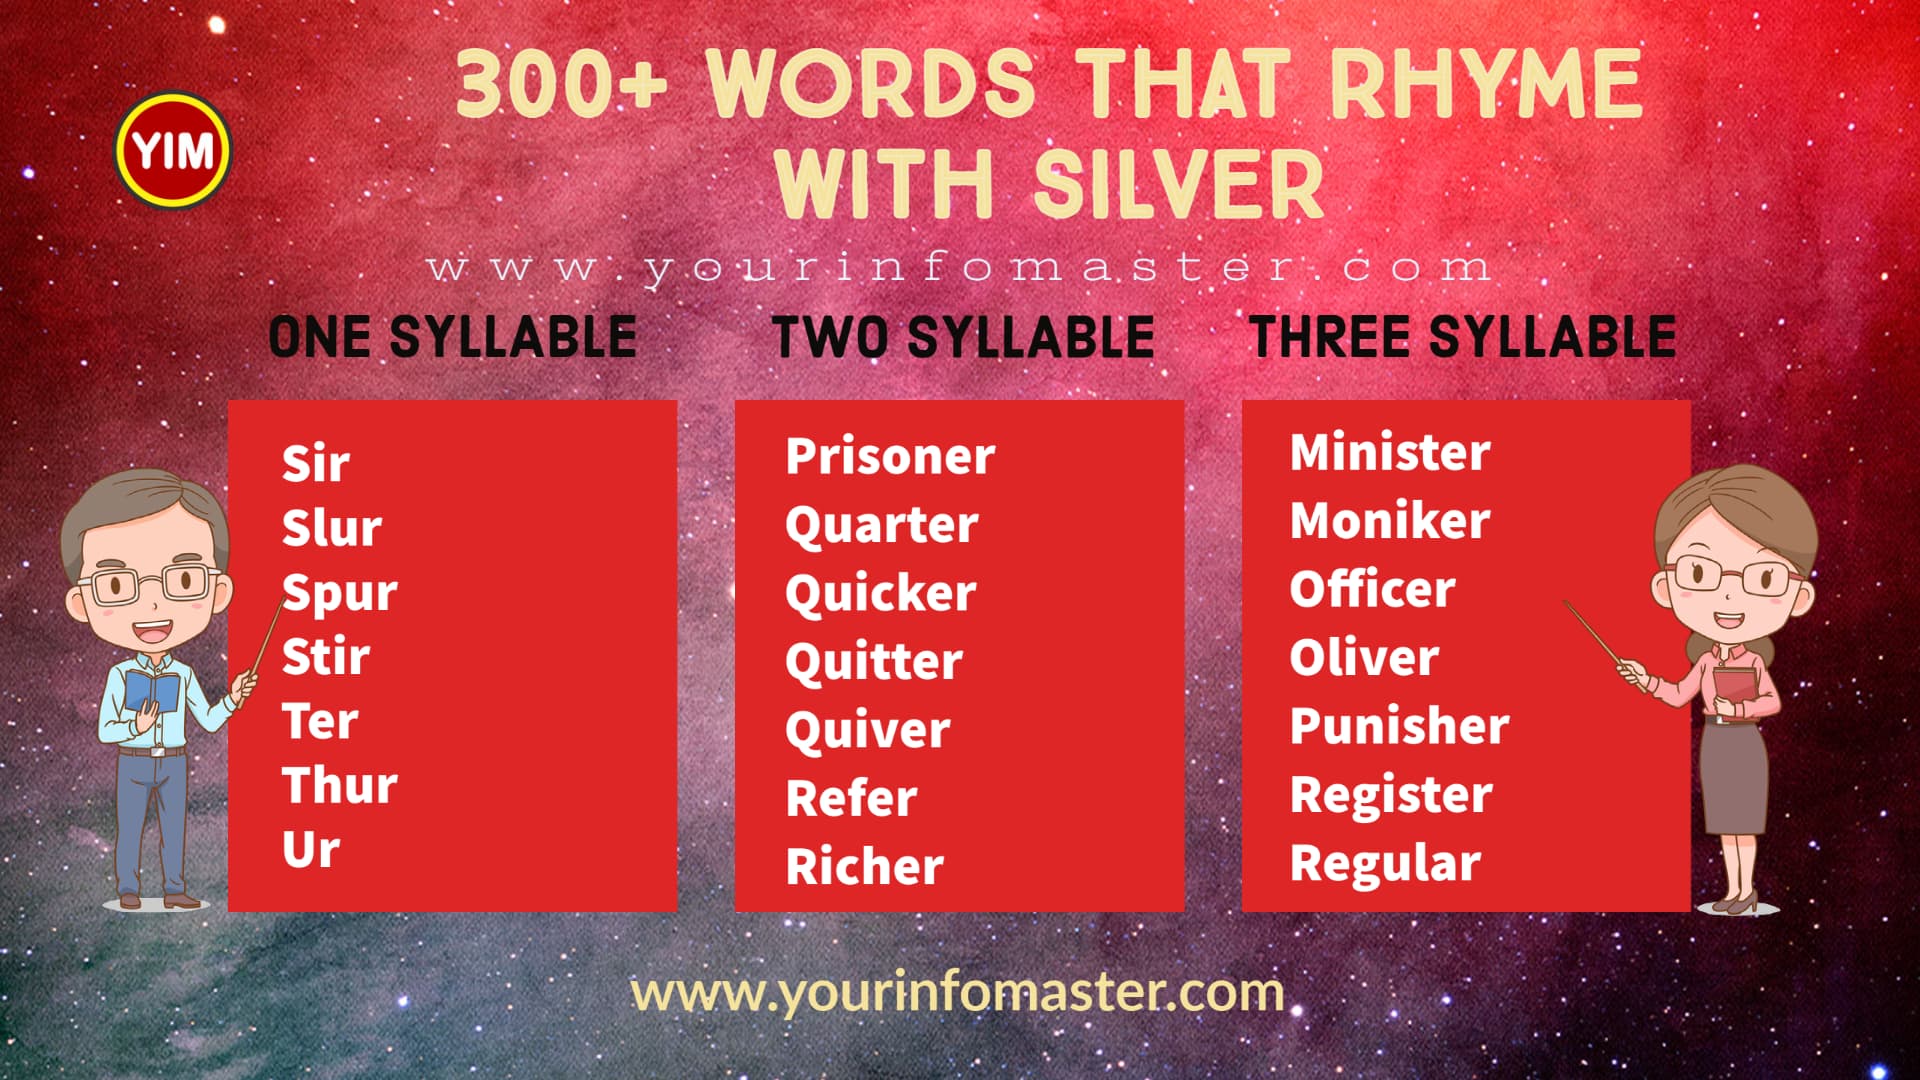 100 rhyming words, 1000 rhyming words, 200+ Interesting Words, 200+ Useful Words, 300 rhyming words list, 50 rhyming words list, 500 rhyming words, all words that rhyme with Silver, Another word for Silver, are rhyming words, how to teach rhyming words, Interesting Words that Rhyme in English, Printable Infographics, Printable Worksheets, rhymes English words, rhymes with Silver infographics, rhyming pairs, Rhyming Words, Rhyming Words for Kids, rhyming words for Silver, Rhyming Words List, Silver rhyme, Silver rhyme examples, Silver Rhyming words, Things that rhyme with Silver, what are rhyming words, what rhymes with Silver, words rhyming with Silver, Words that Rhyme, Words That Rhyme with Silver